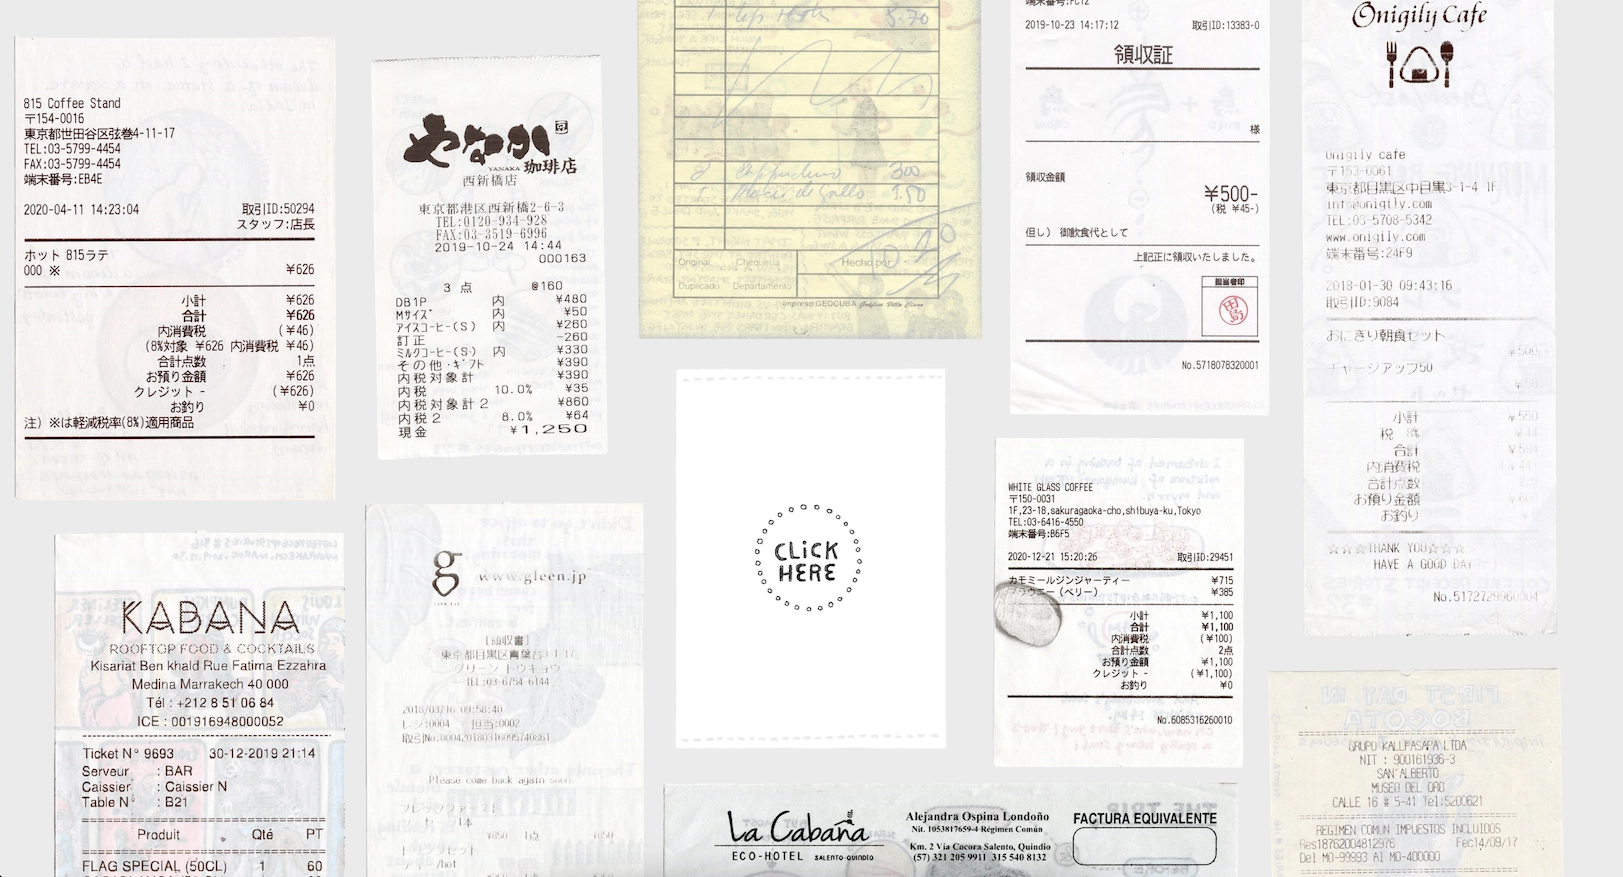 Coffee Receipt Stories are told using varied storytelling devices like comics and infographics.